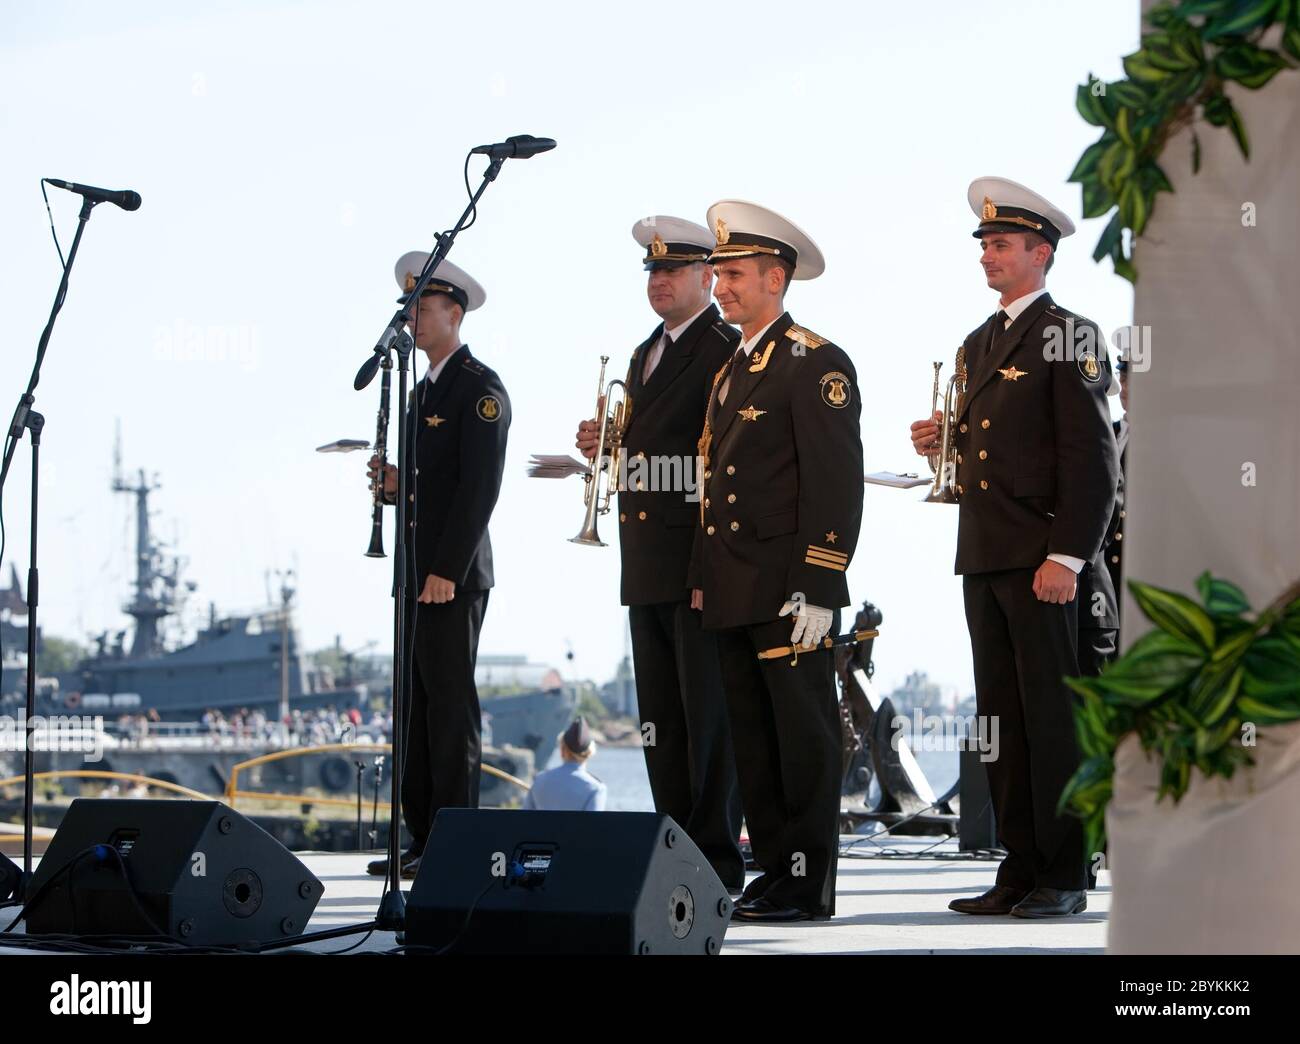 military band musicians perform on a city holiday, Stock Photo